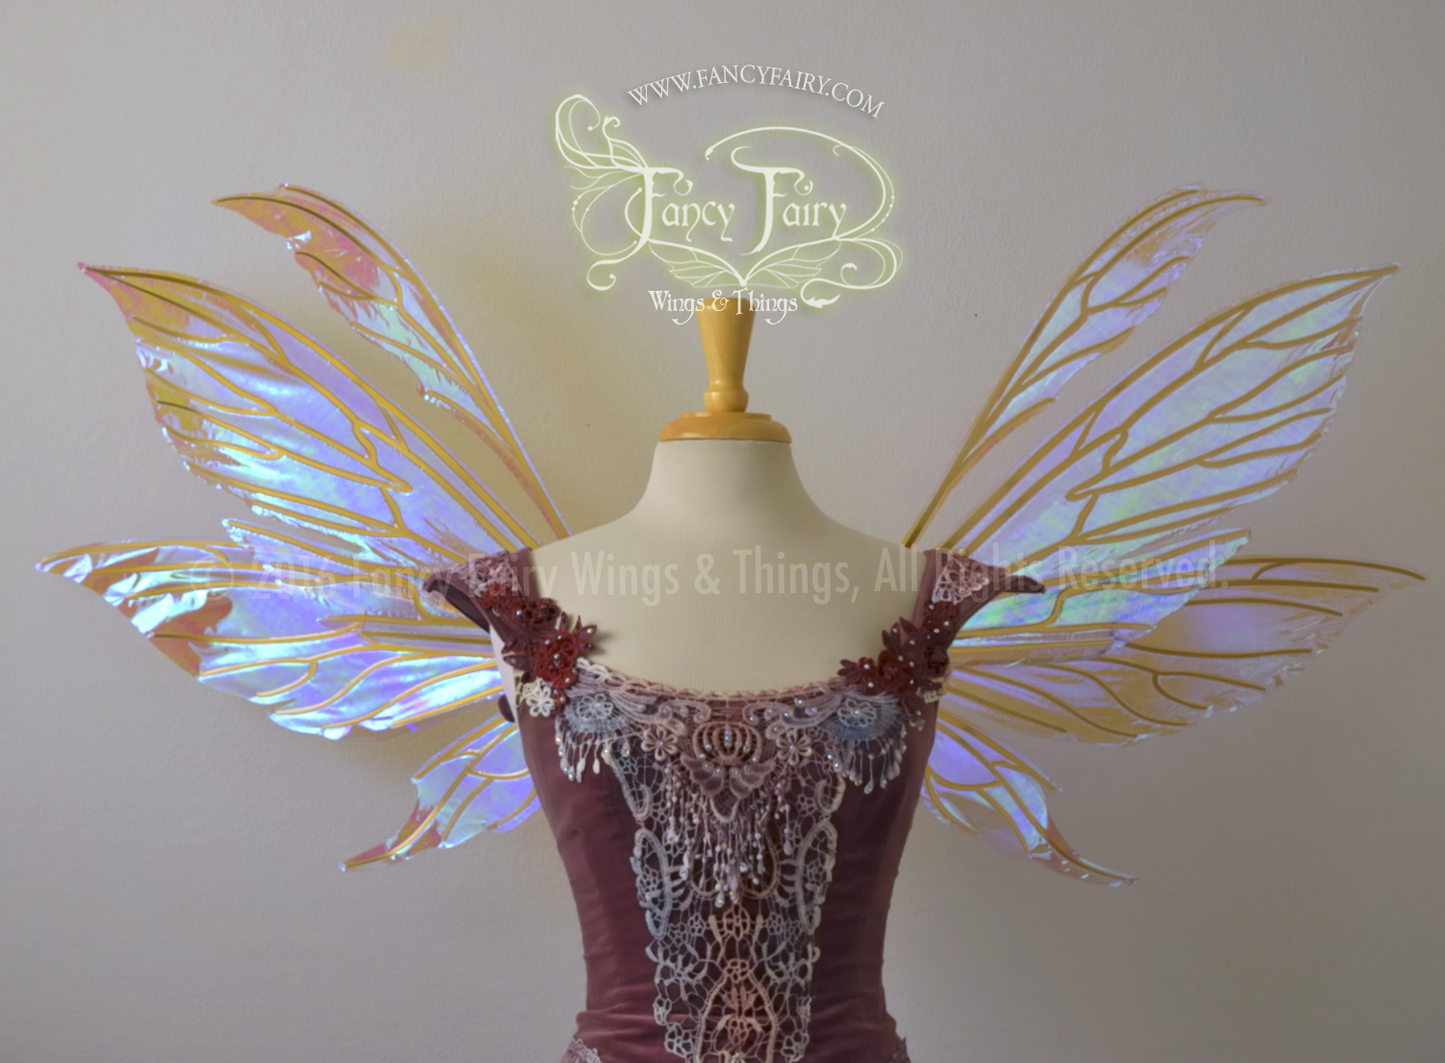 Aynia Iridescent Fairy Wings in Lilac with Gold veins